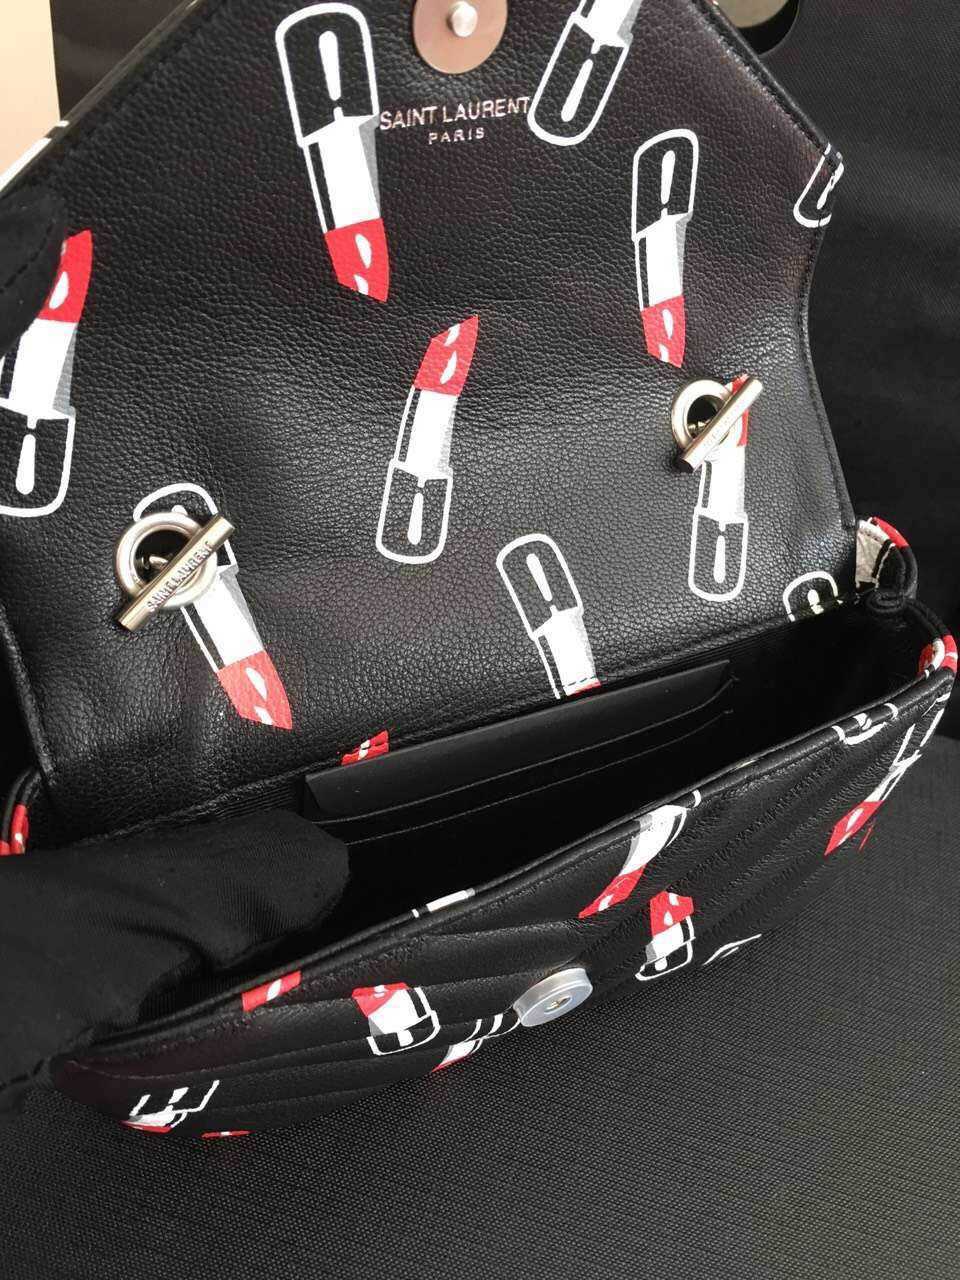 Limited Edition!2016 Saint Laurent Bags Cheap Sale-Saint Laurent Classic Baby Monogram Chain Bag in Black Matelasse Leather with Lipstick Print - Click Image to Close